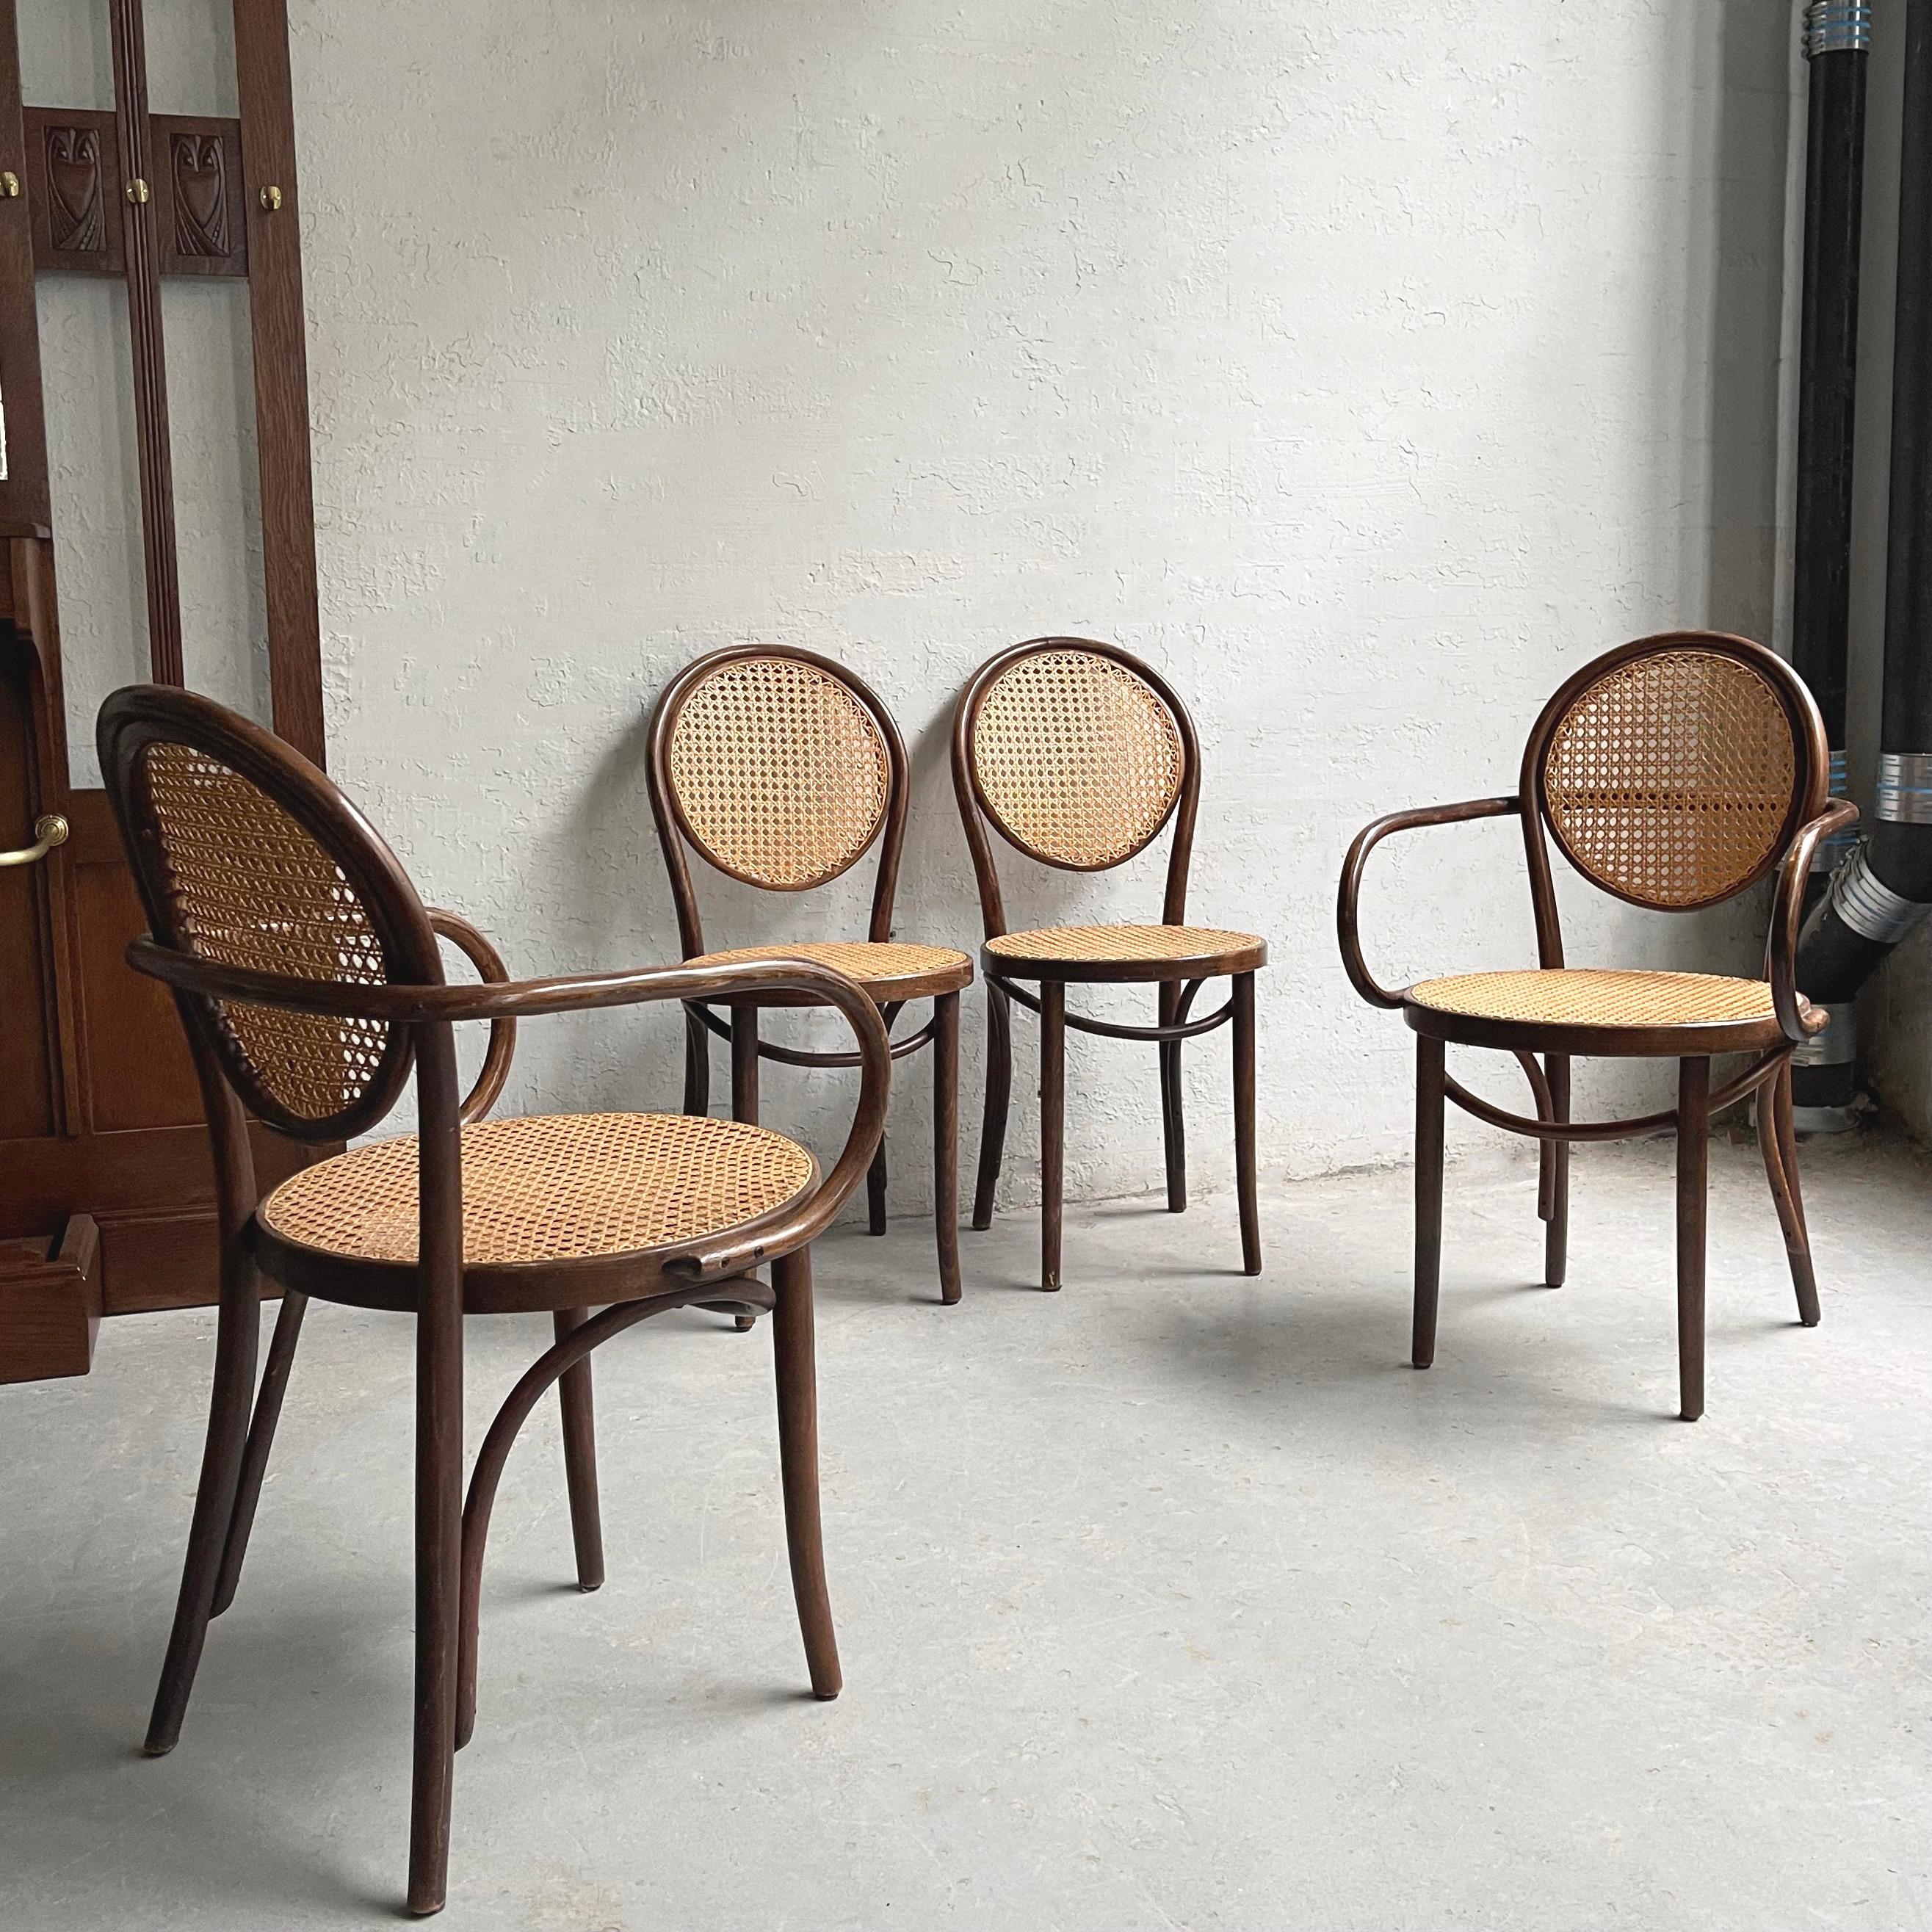 American Bentwood and Cane Bistro Dining Chairs Attributed to Thonet